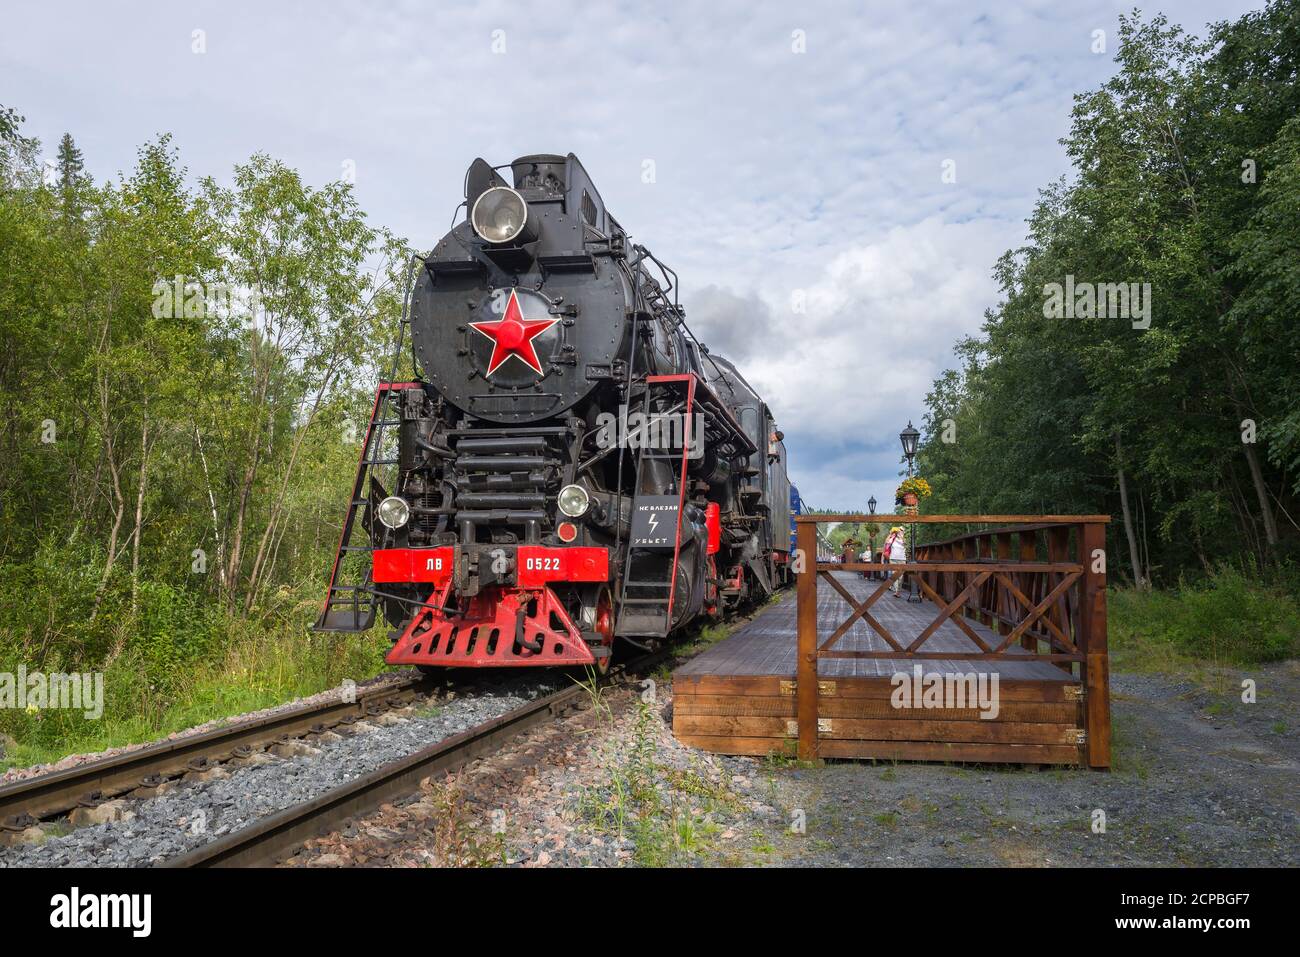 RUSKEALA, RUSSIA - AUGUST 15, 2020: Soviet steam locomotive LV-0522 and the Ruskealsky Express retro train at the apron of the Ruskeala Mountain Park Stock Photo